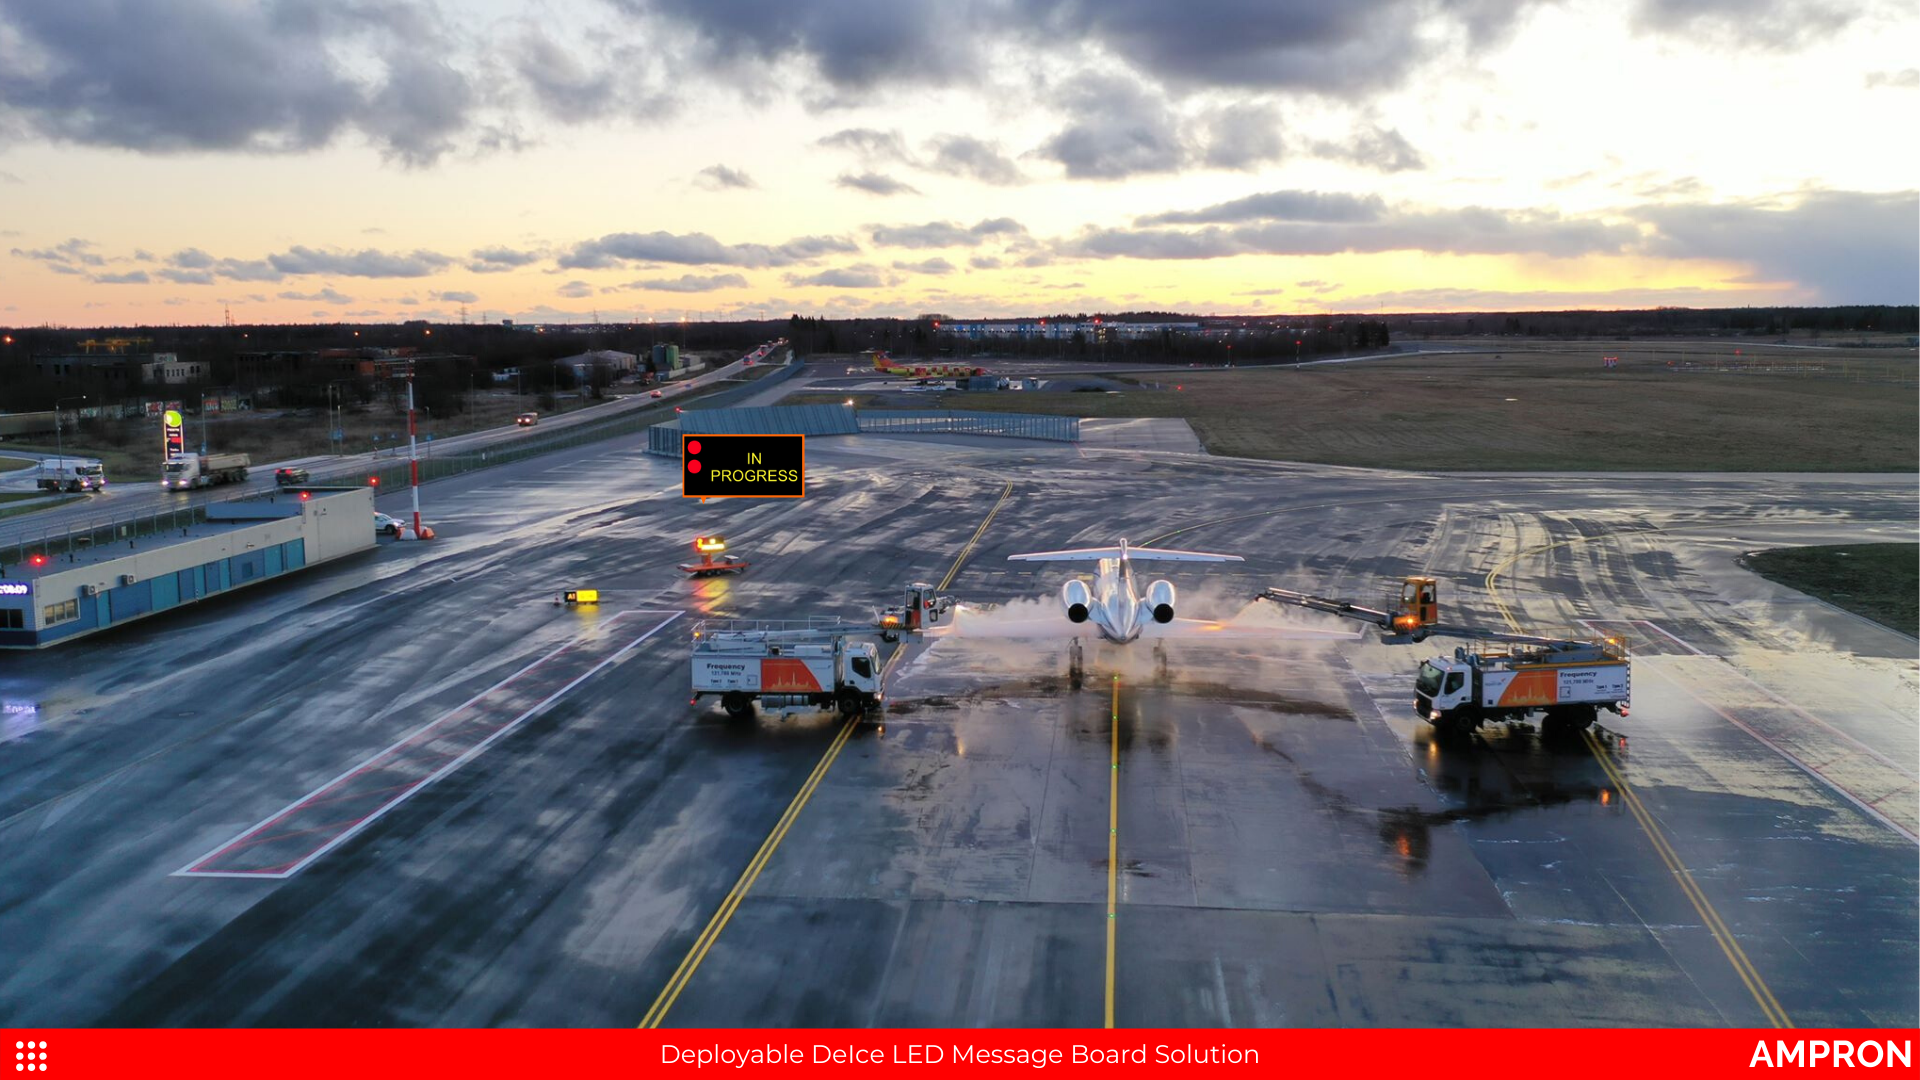 Deployable DeIce LED Message Board Solution at Tallinn Airport